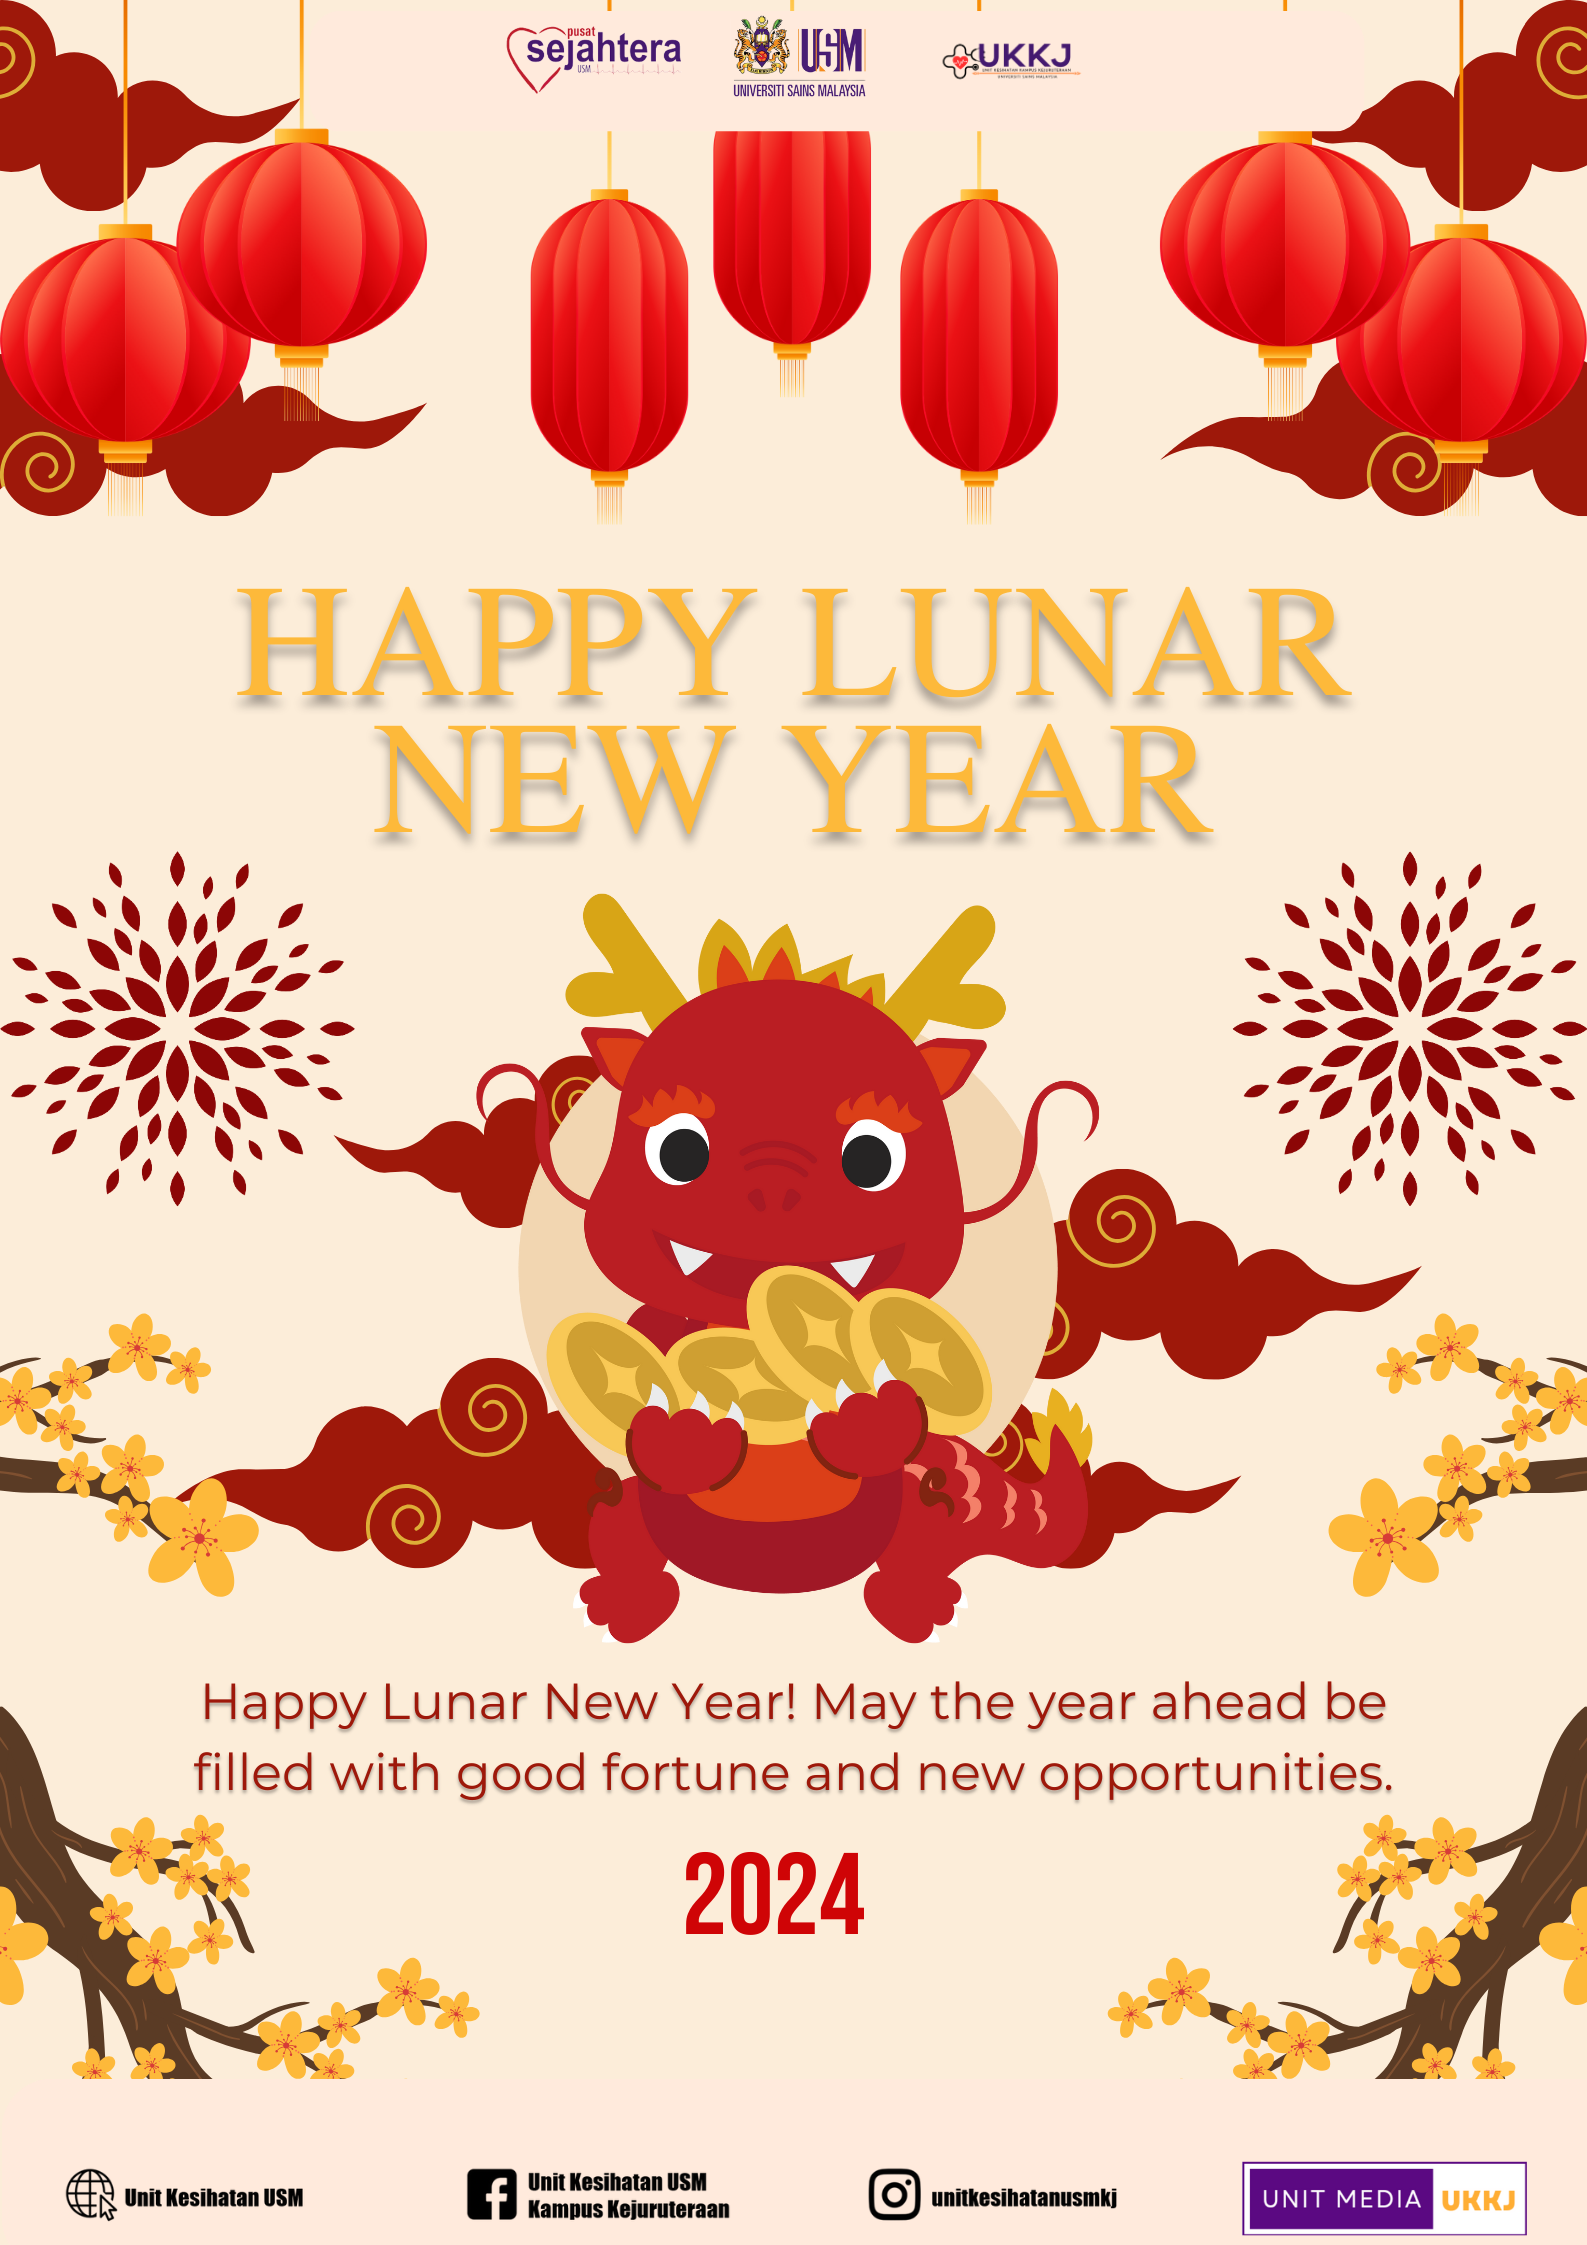 2. Feb Chinese New Year 2024 Poster